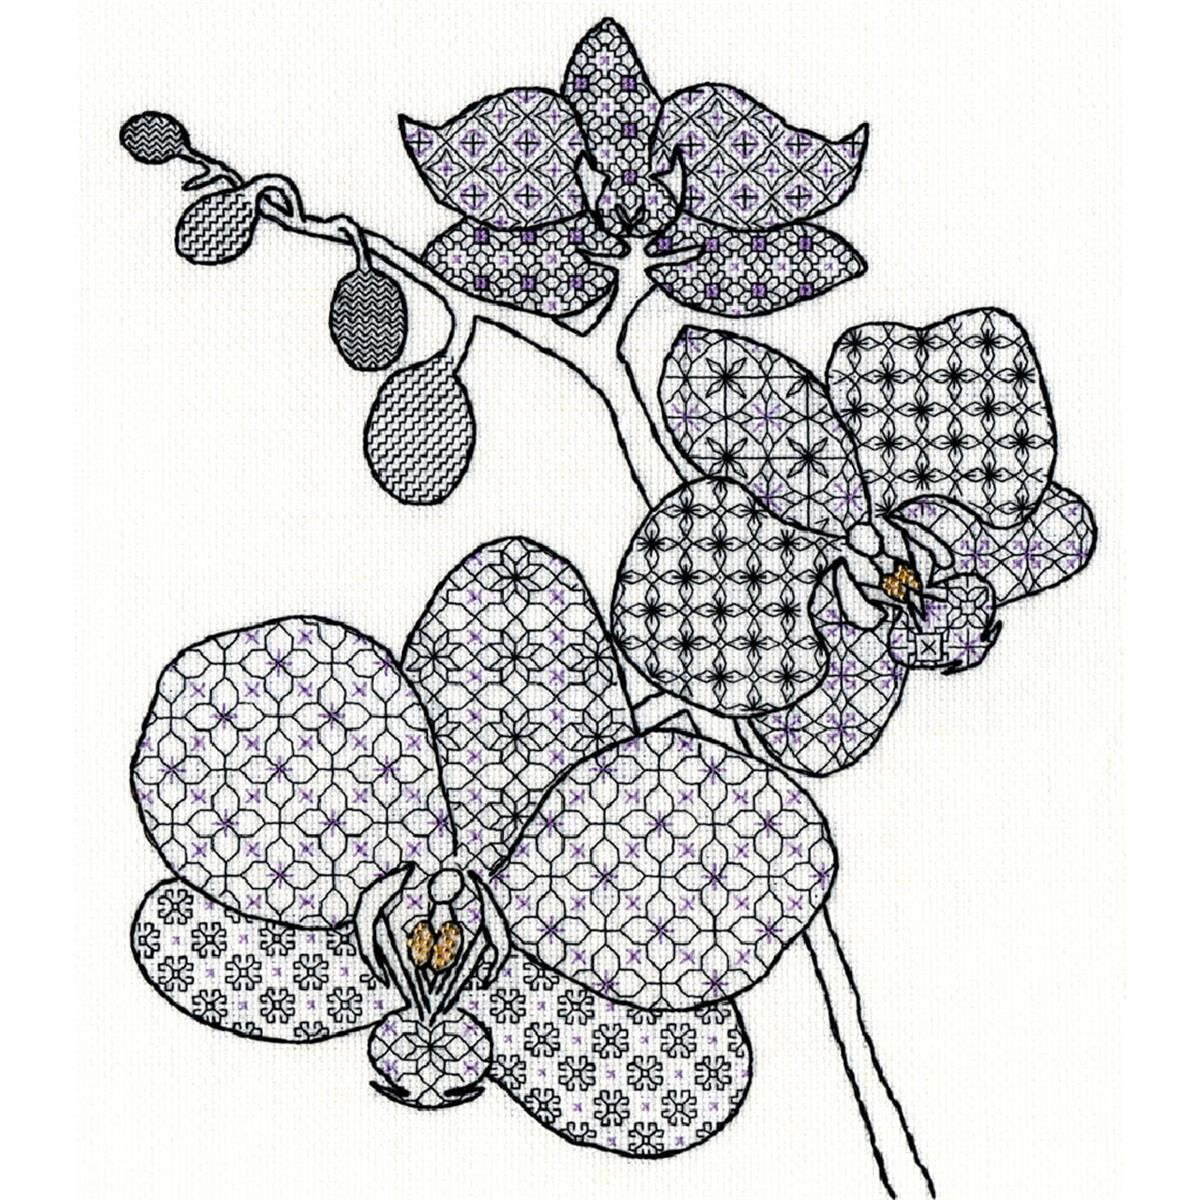 Depicted is an embroidery of an orchid branch with three...